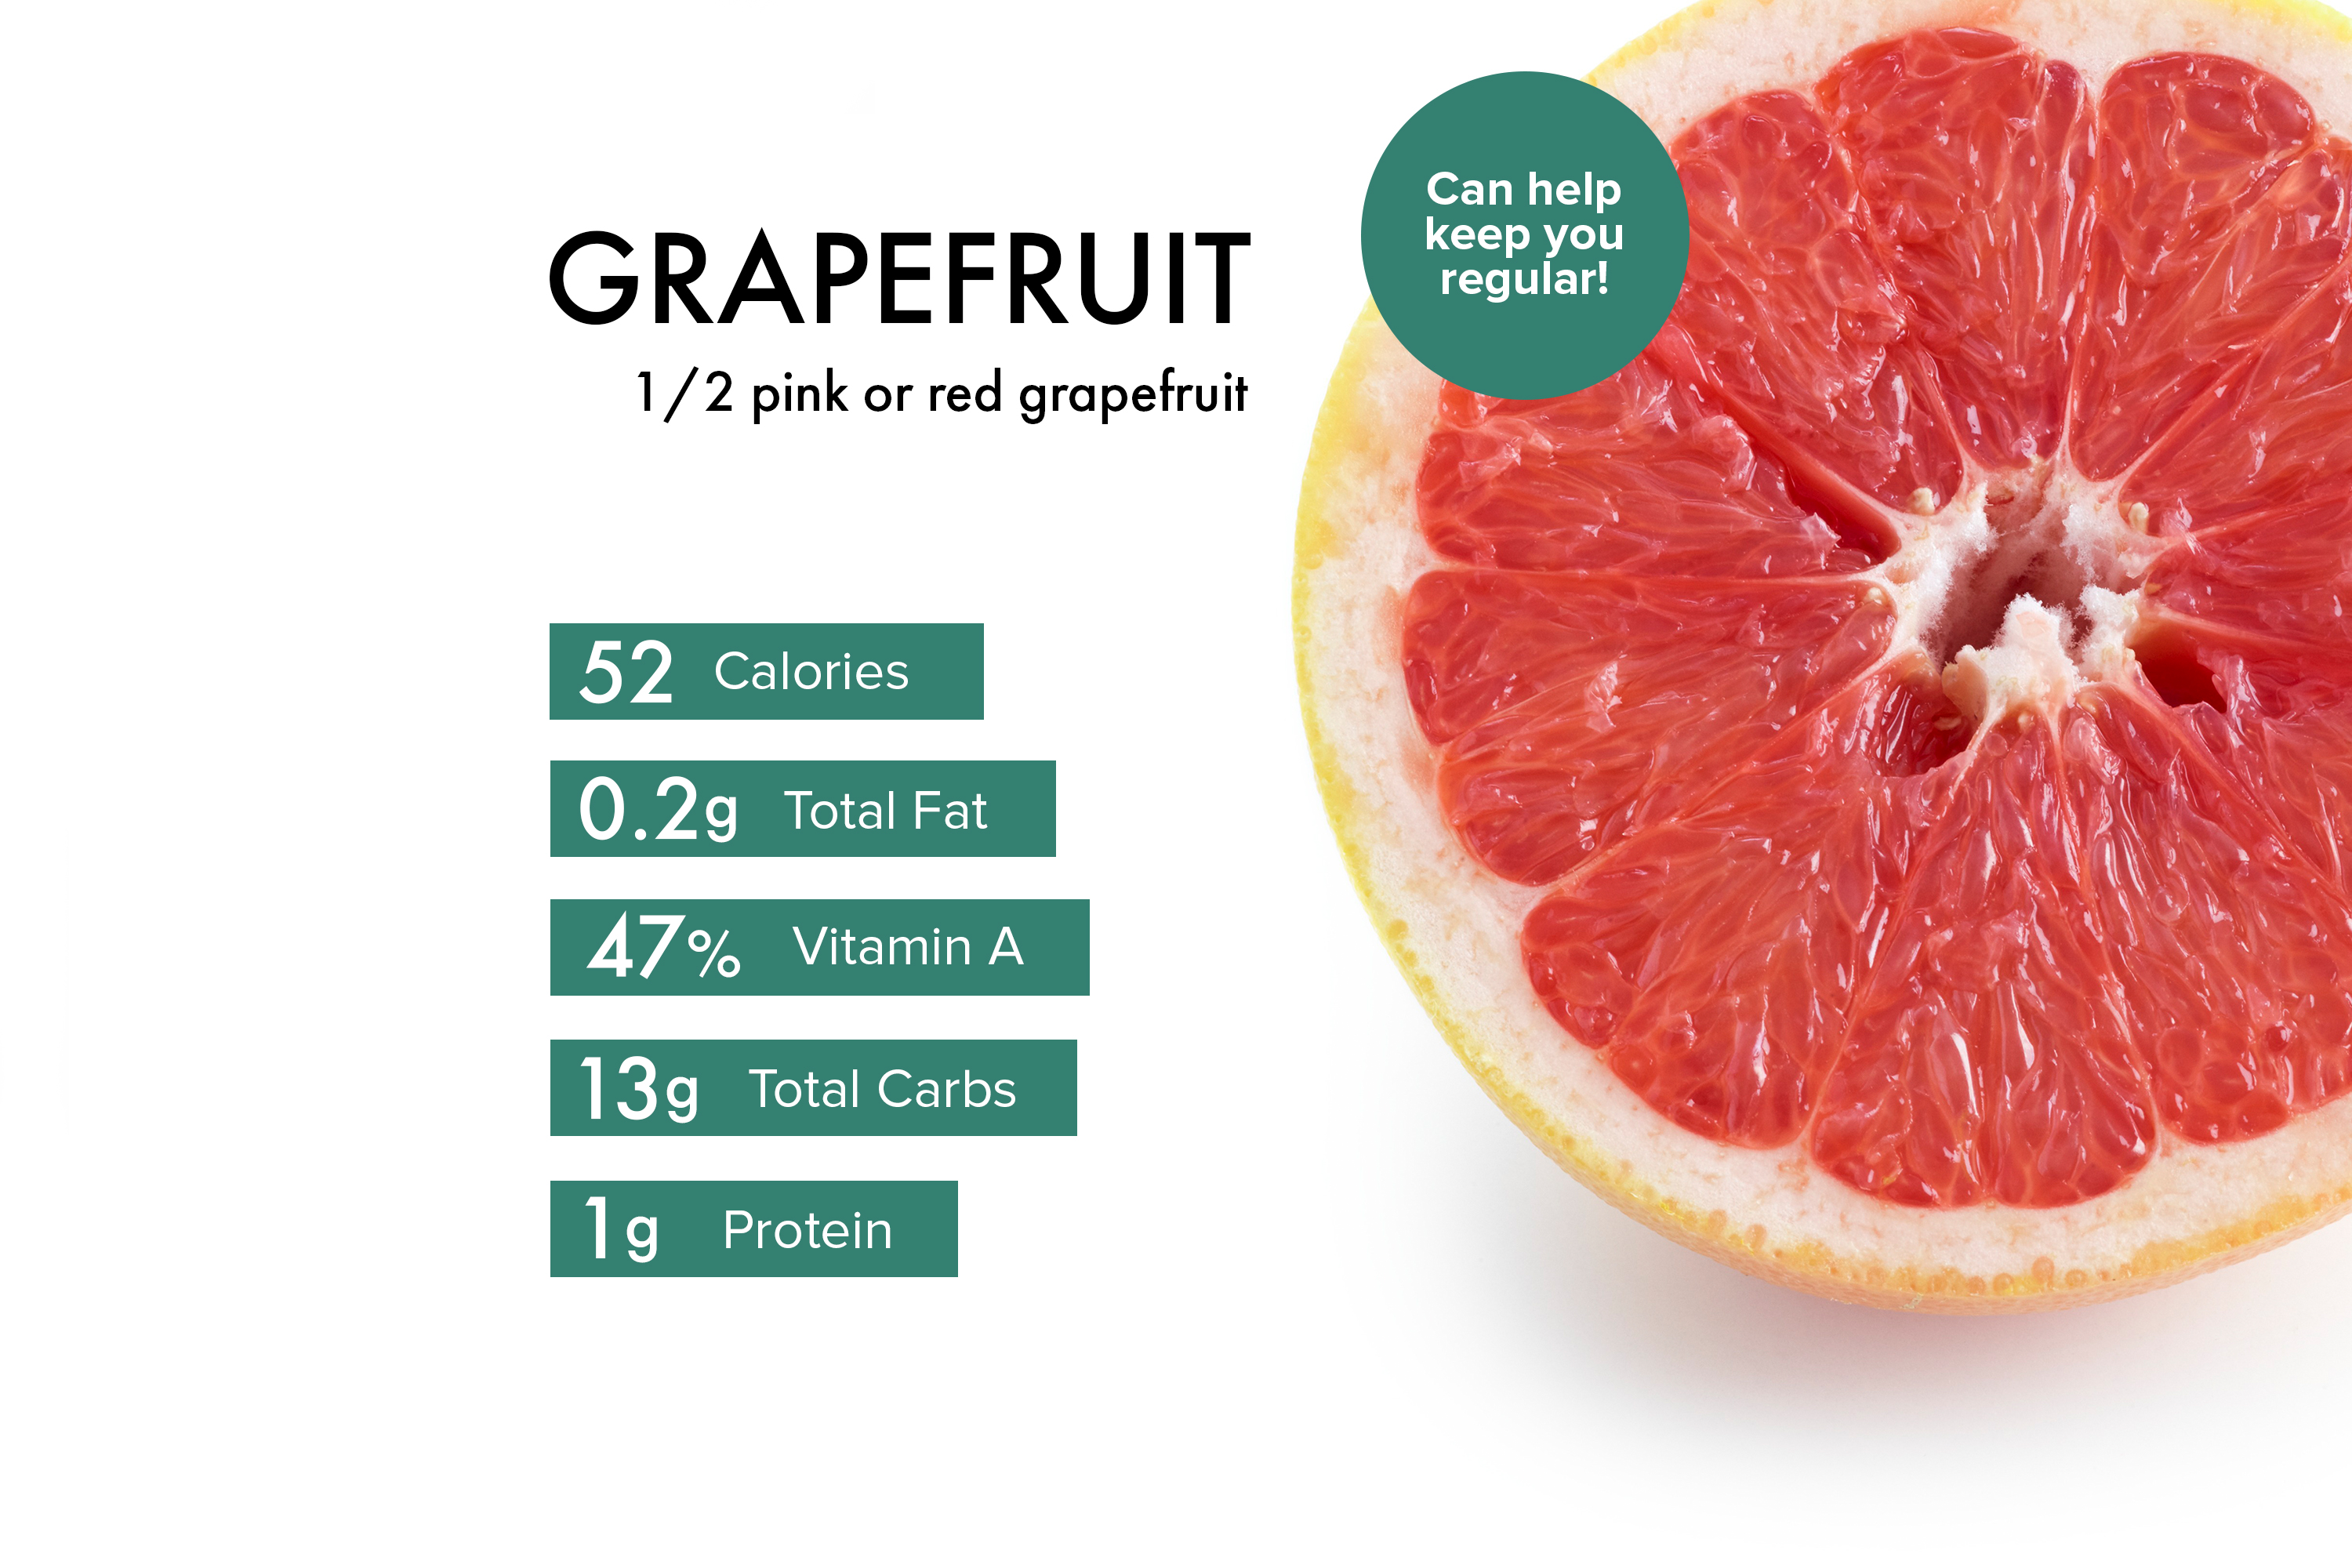 livestrong and Diets | Benefits, Calories, Nutrition: Facts, Risks Grapefruit